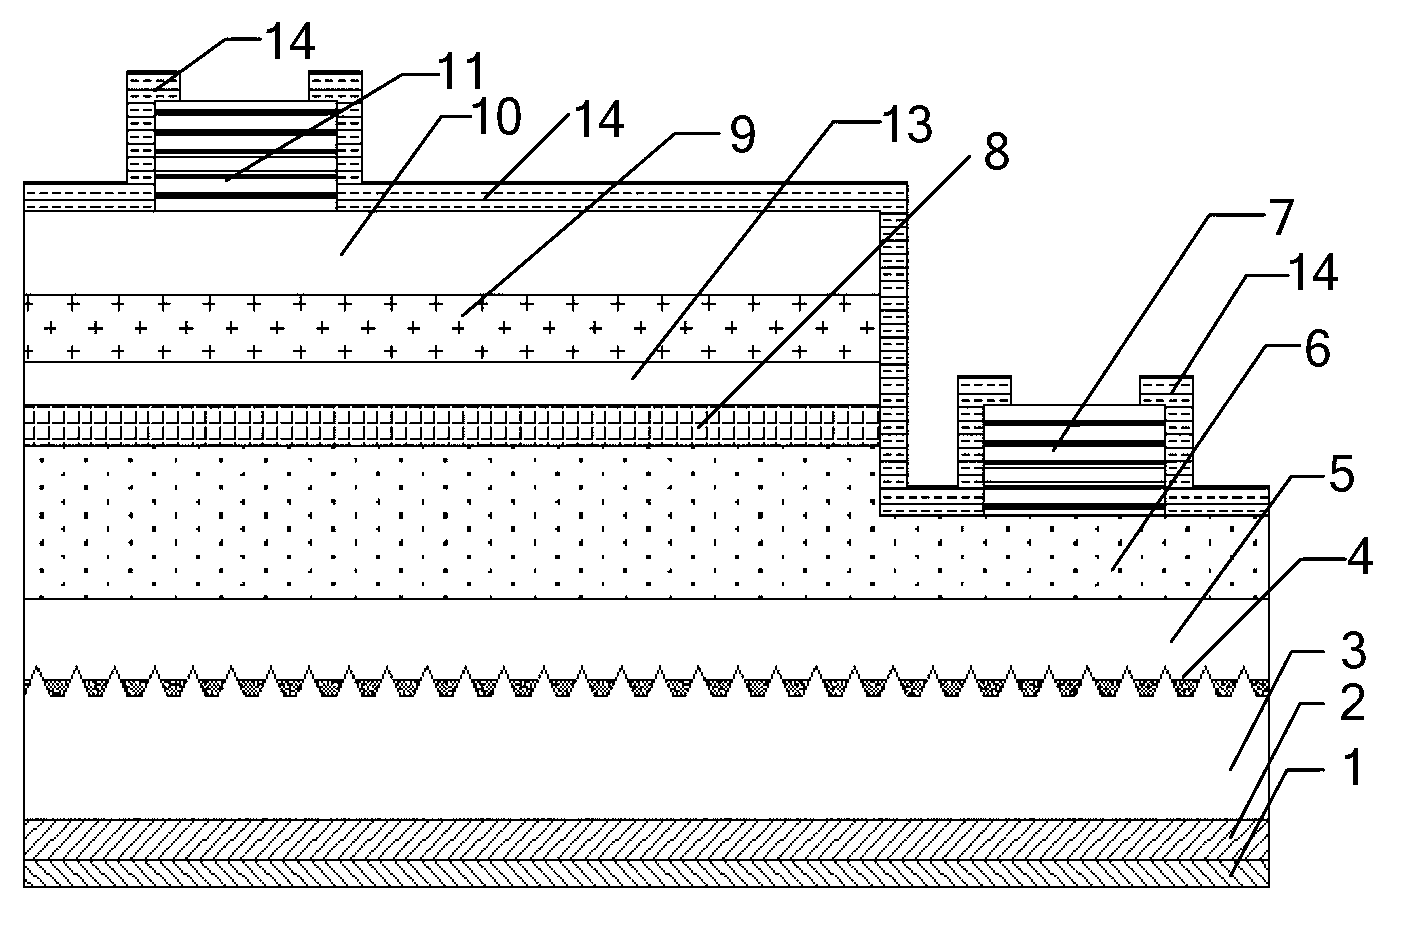 Light-emitting diode (LED) with reflector structure